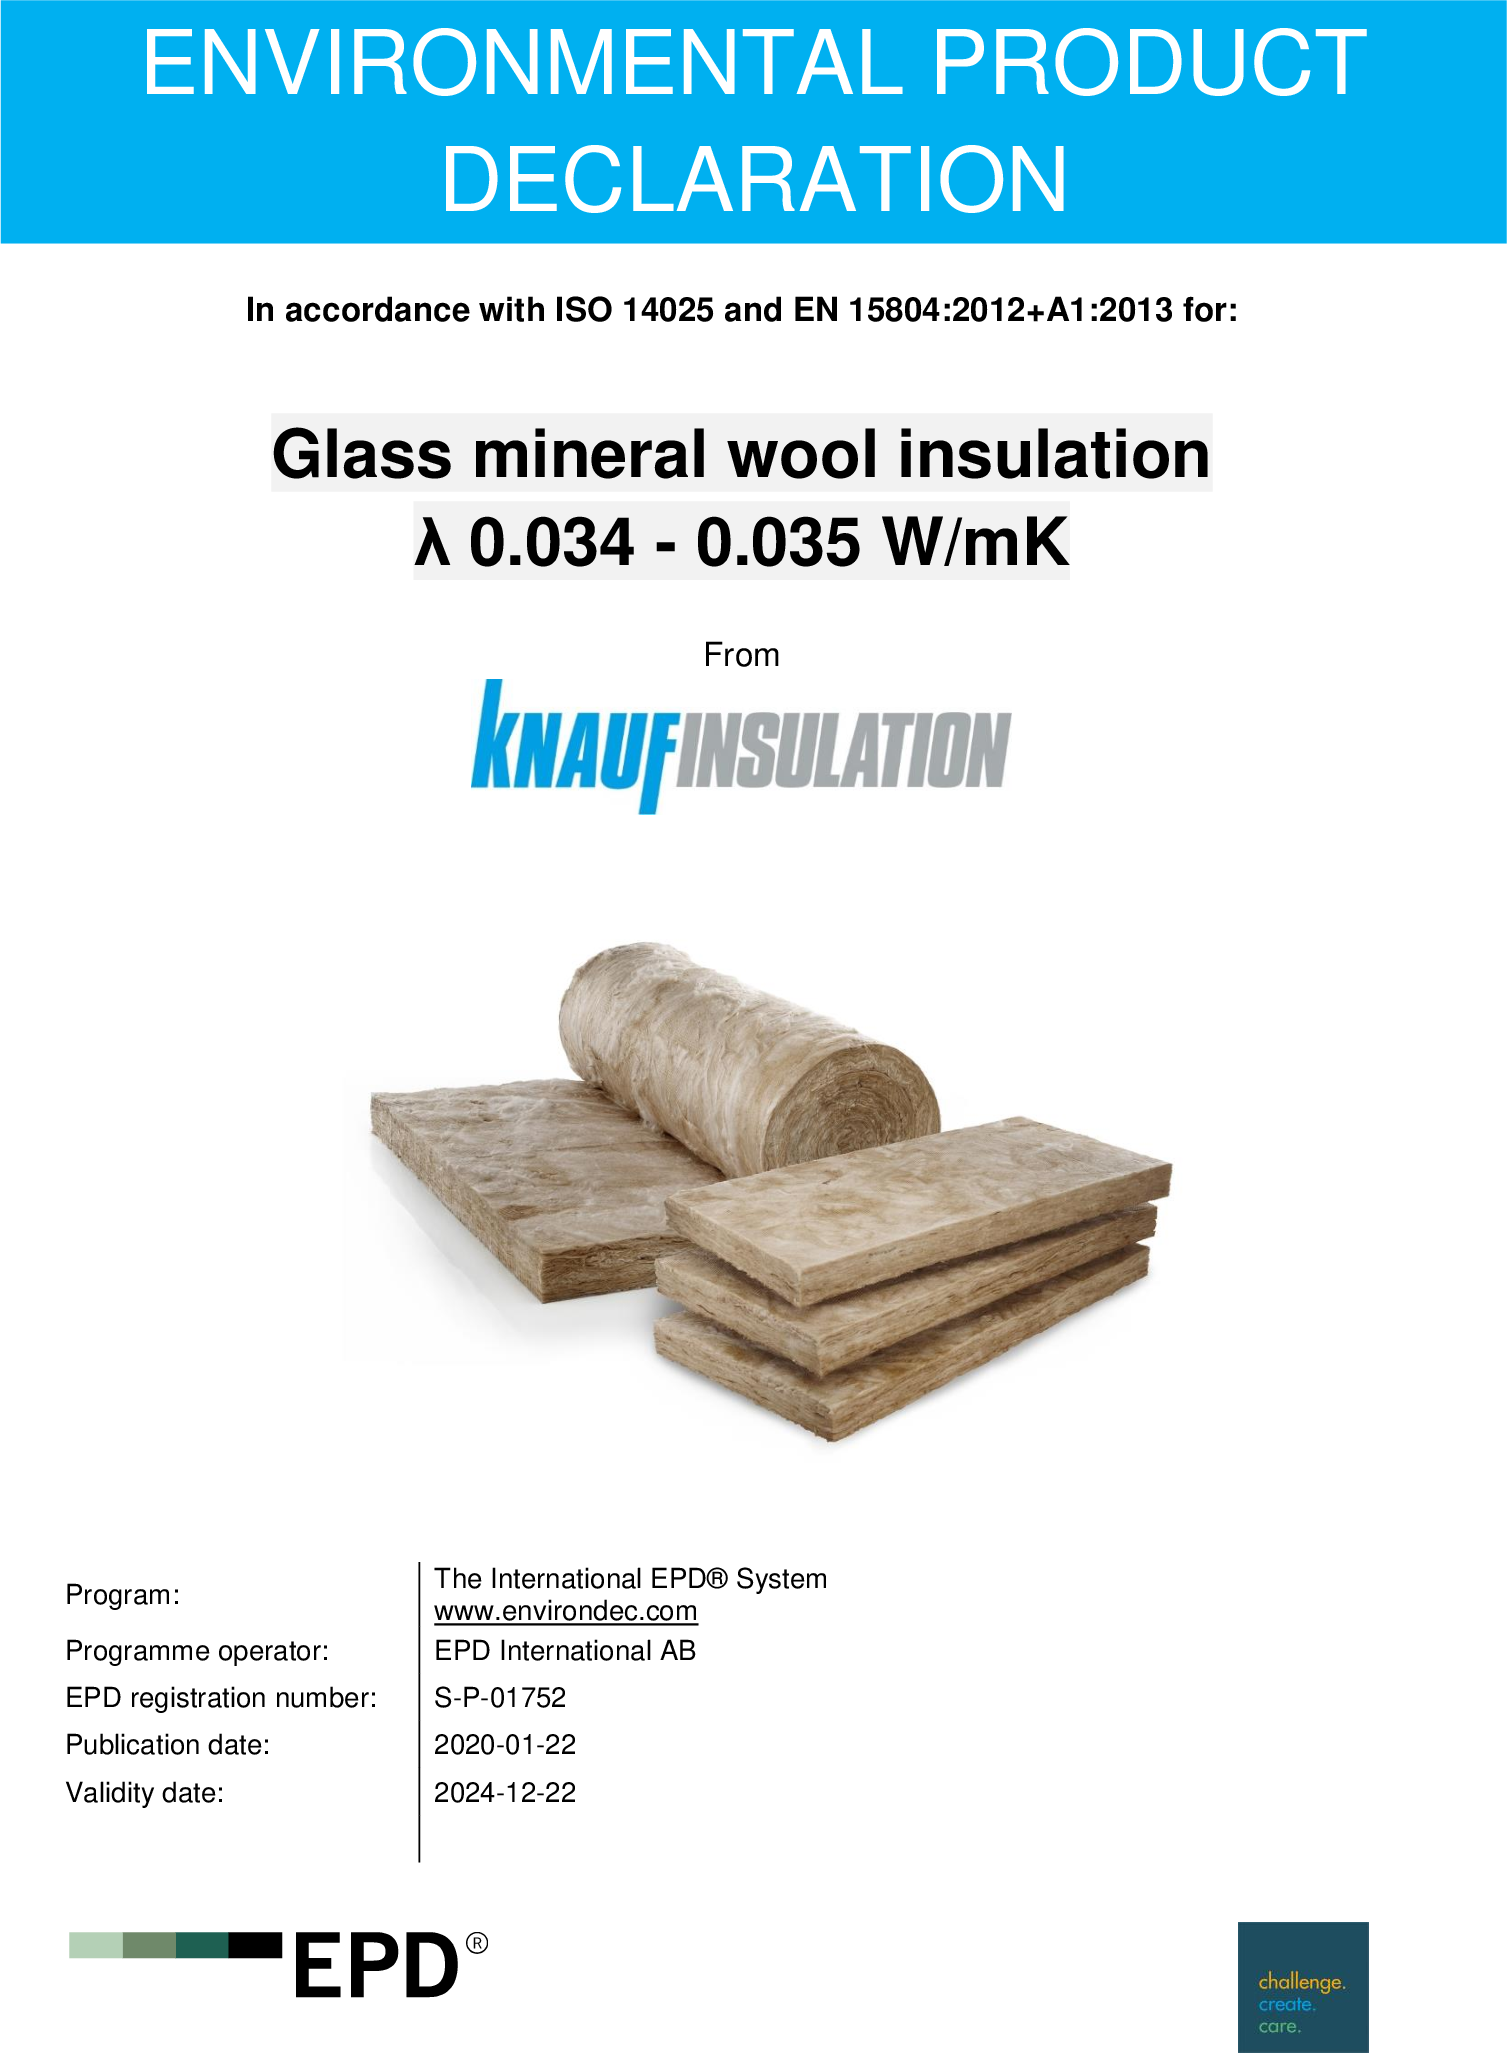 Environment Product Declaration (EPD) - Glass Mineral Wool 0.034 - 0.035 W/mK